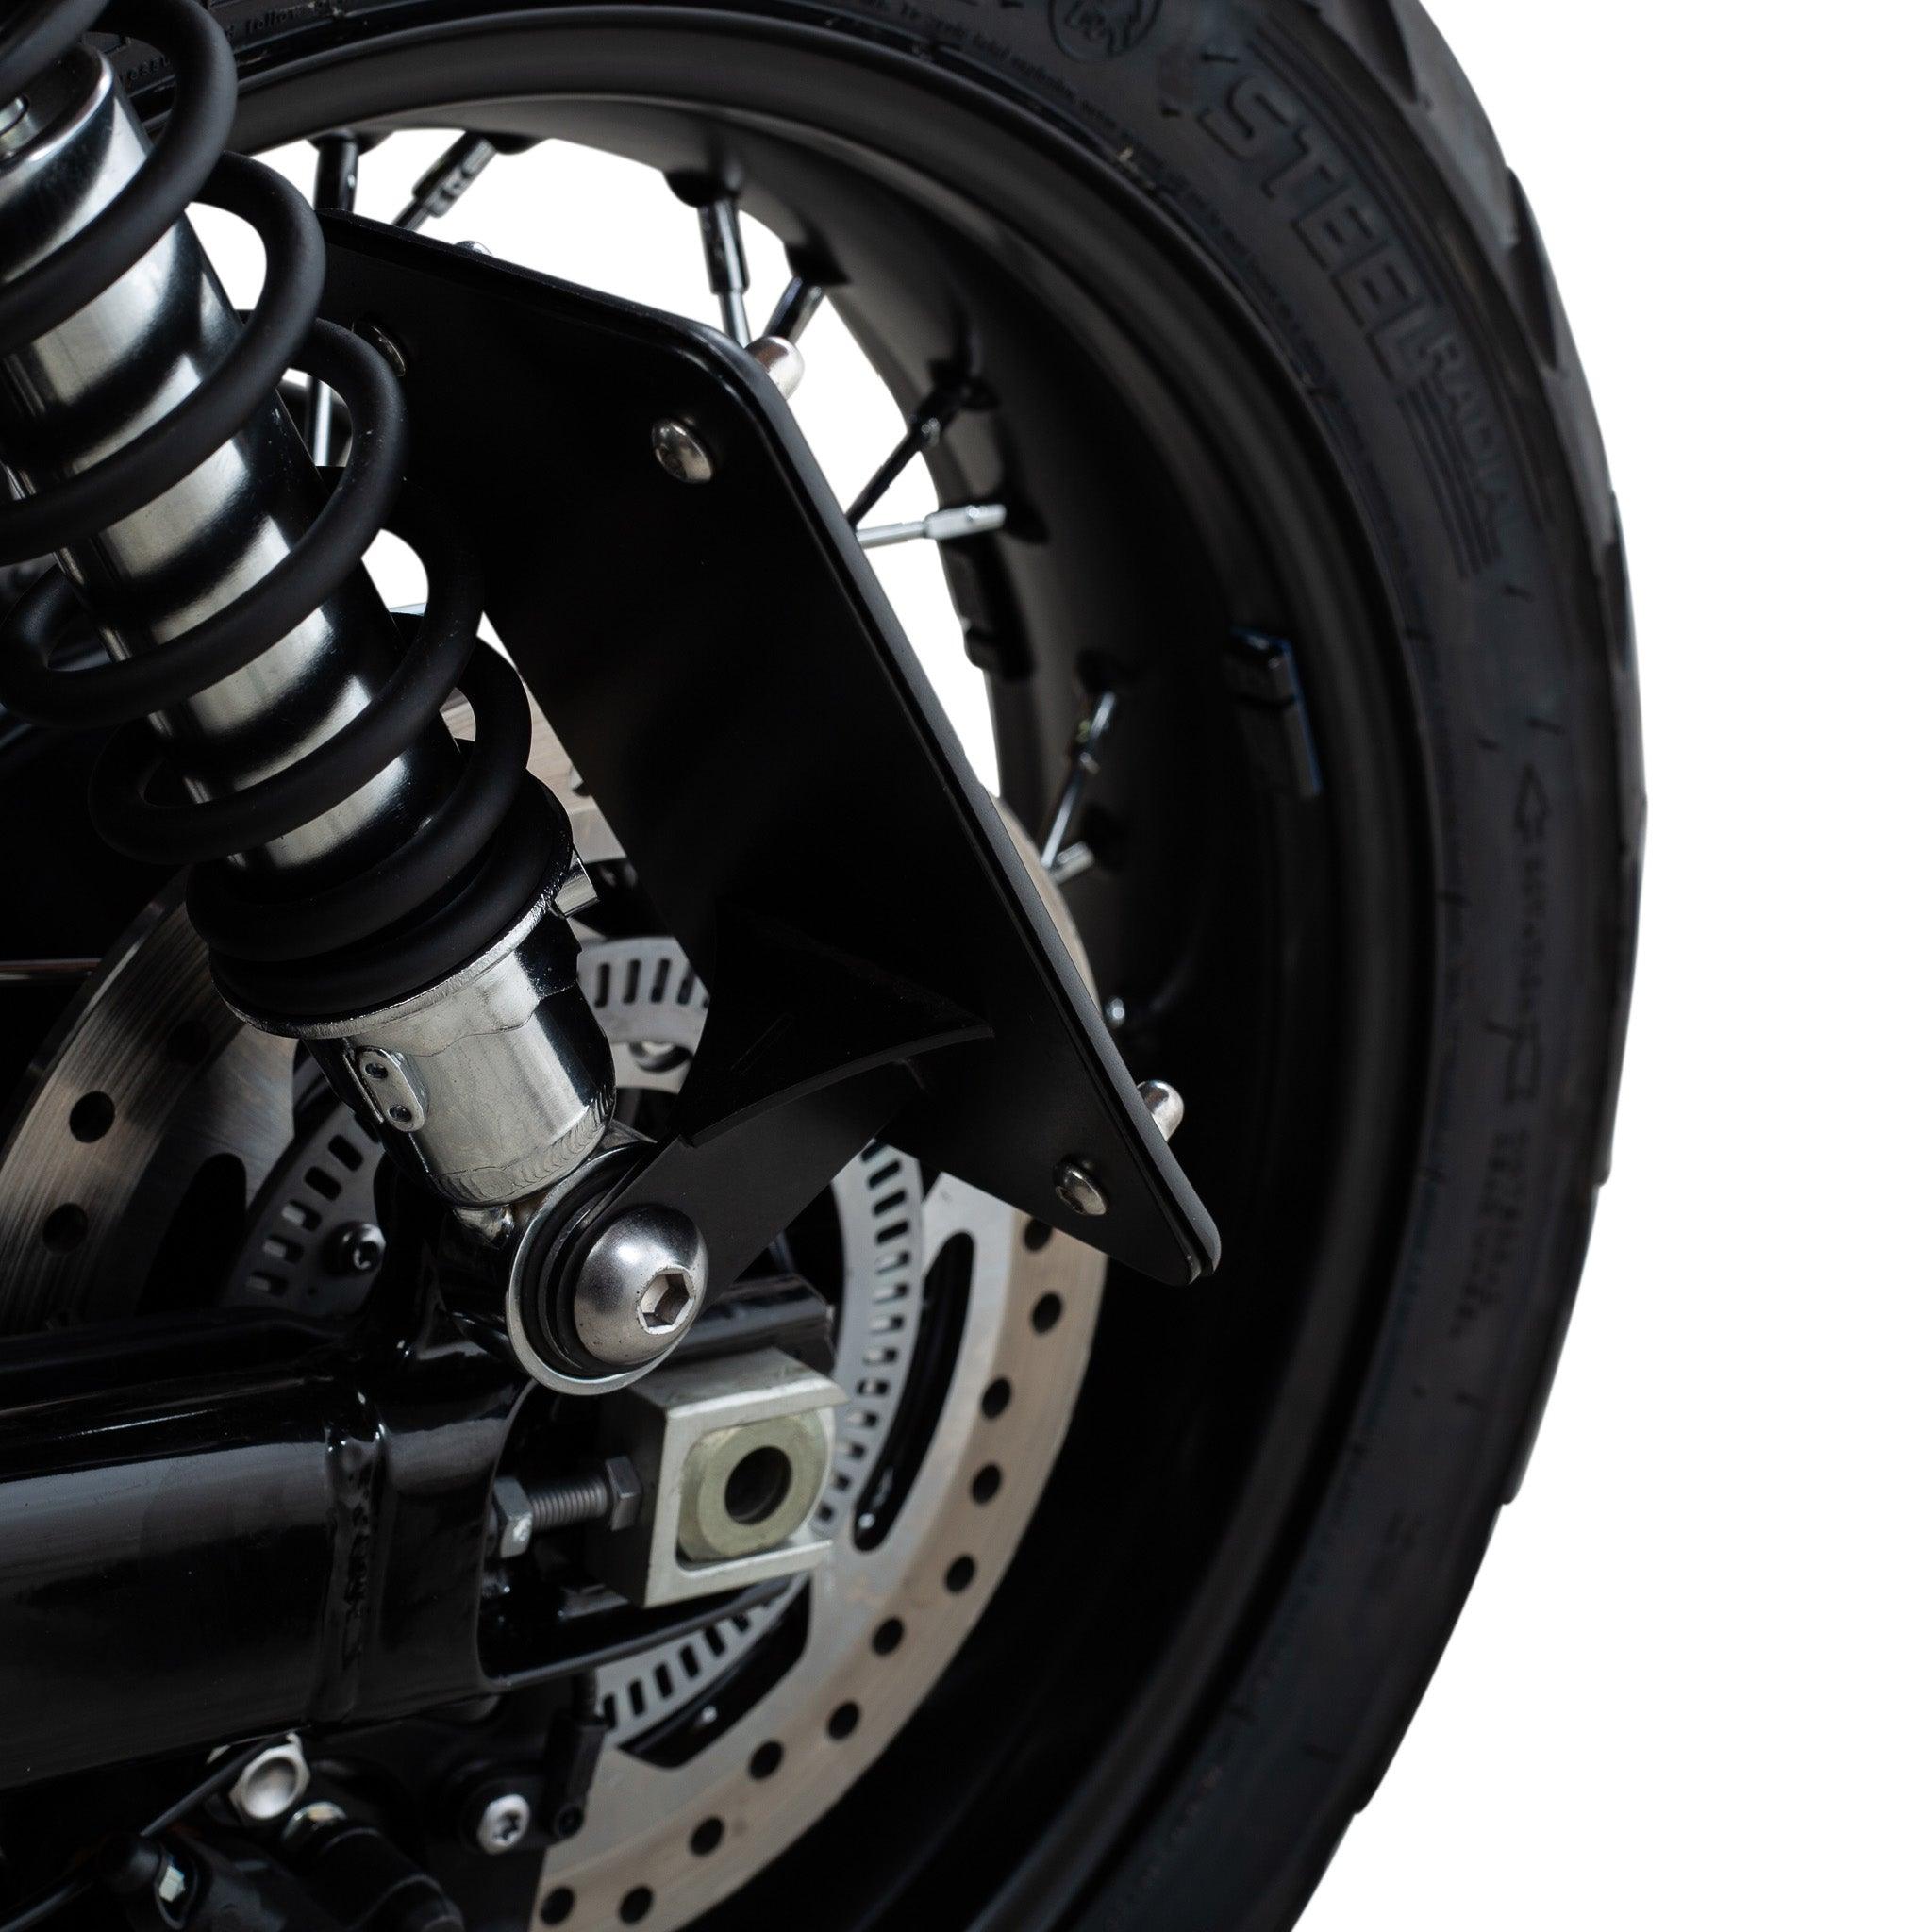 8mm Shock Mount License Plate for Triumph Motorcycles - British Customs